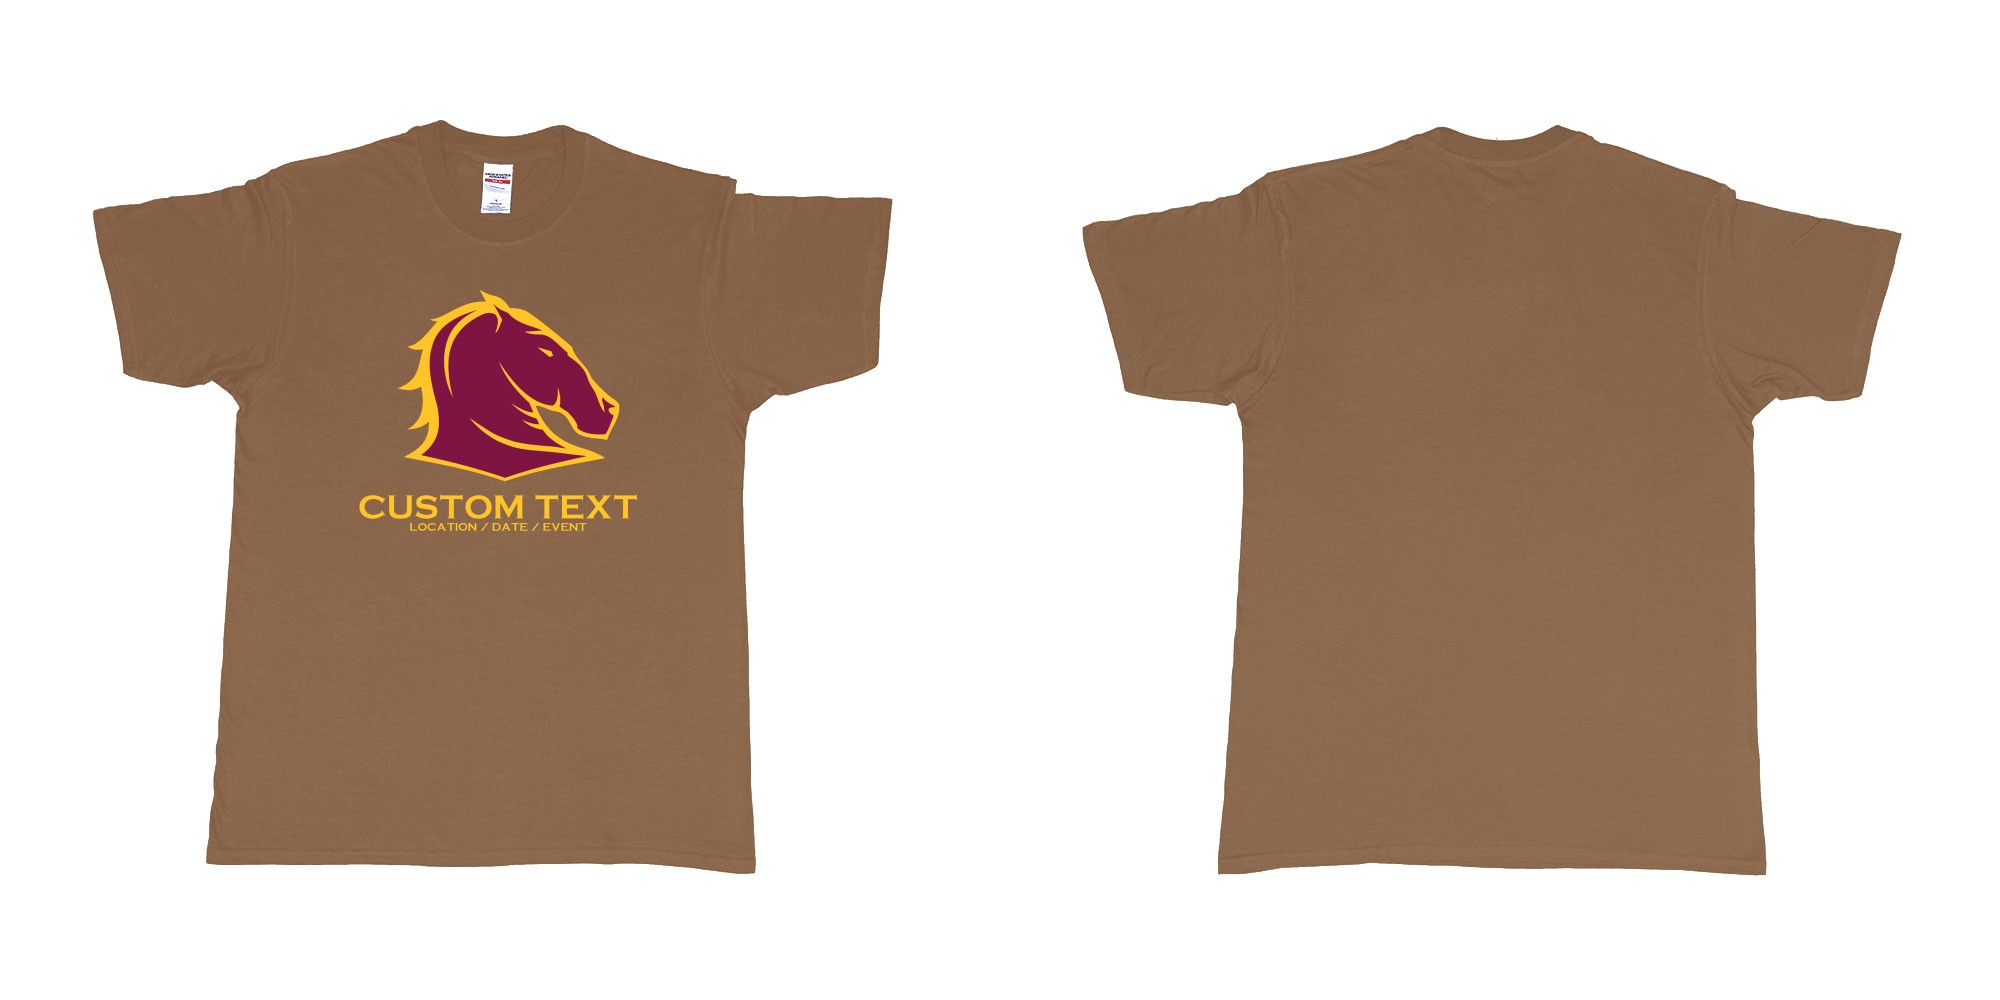 Custom tshirt design brisbane broncos australian professional rugby league football club queensland in fabric color chestnut choice your own text made in Bali by The Pirate Way